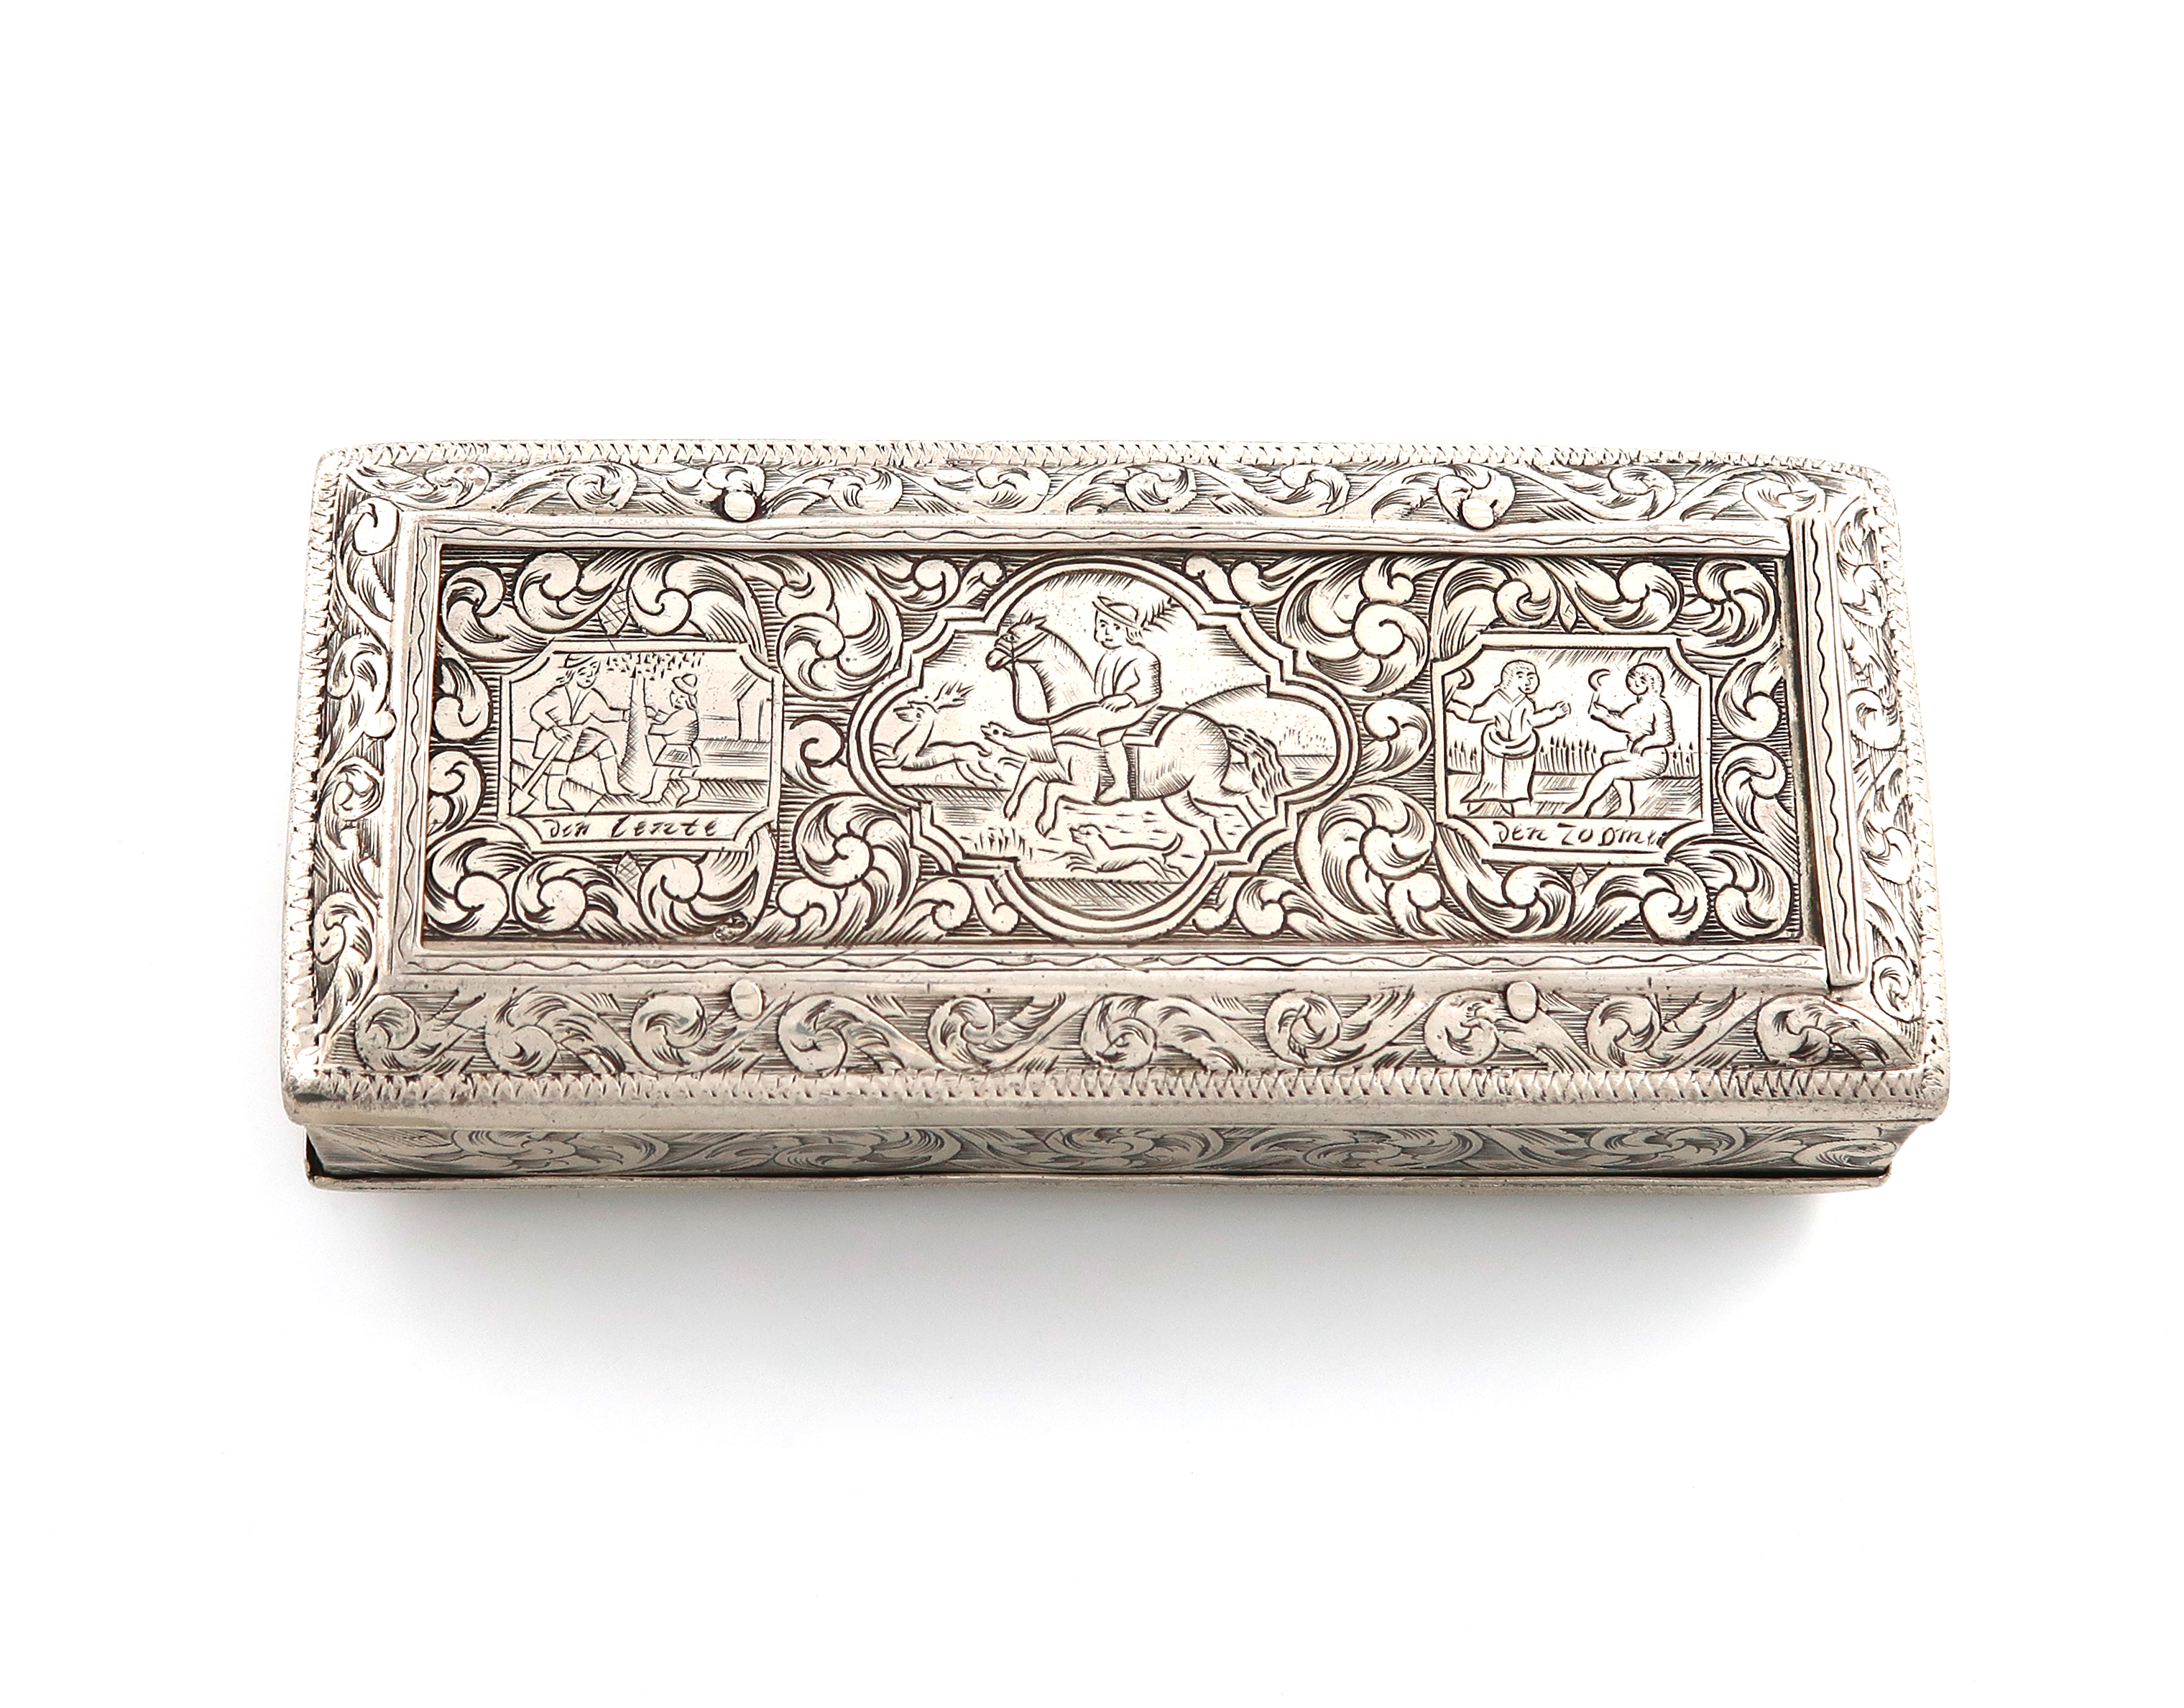 A 19th century Dutch silver tobacco box, by Rinze Jans Spaanstra, in the early 17th century - Image 2 of 6